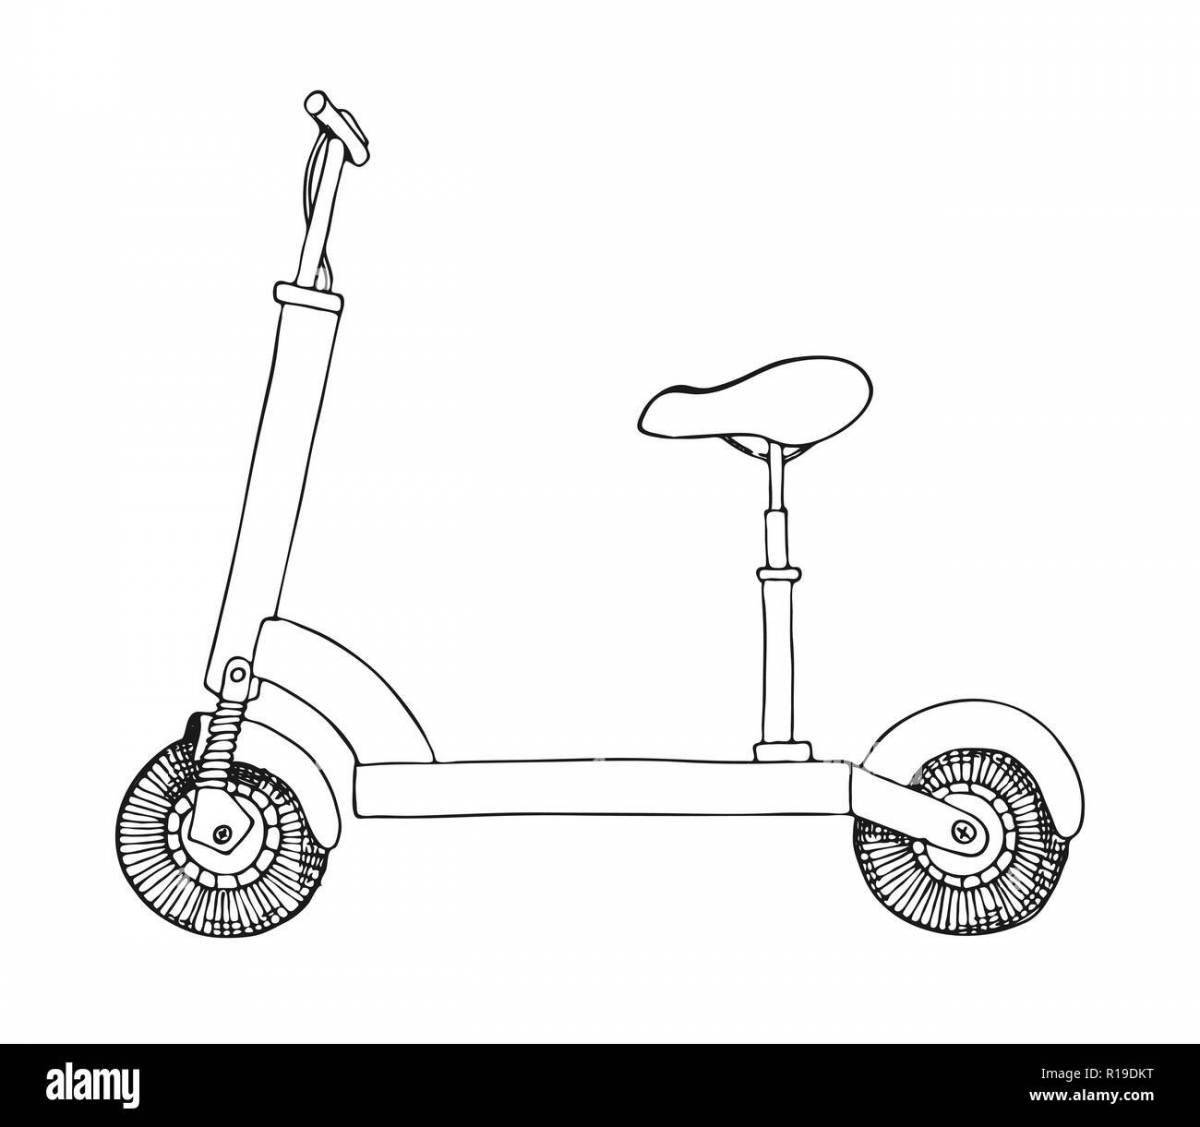 Exquisite scooter coloring book for kids